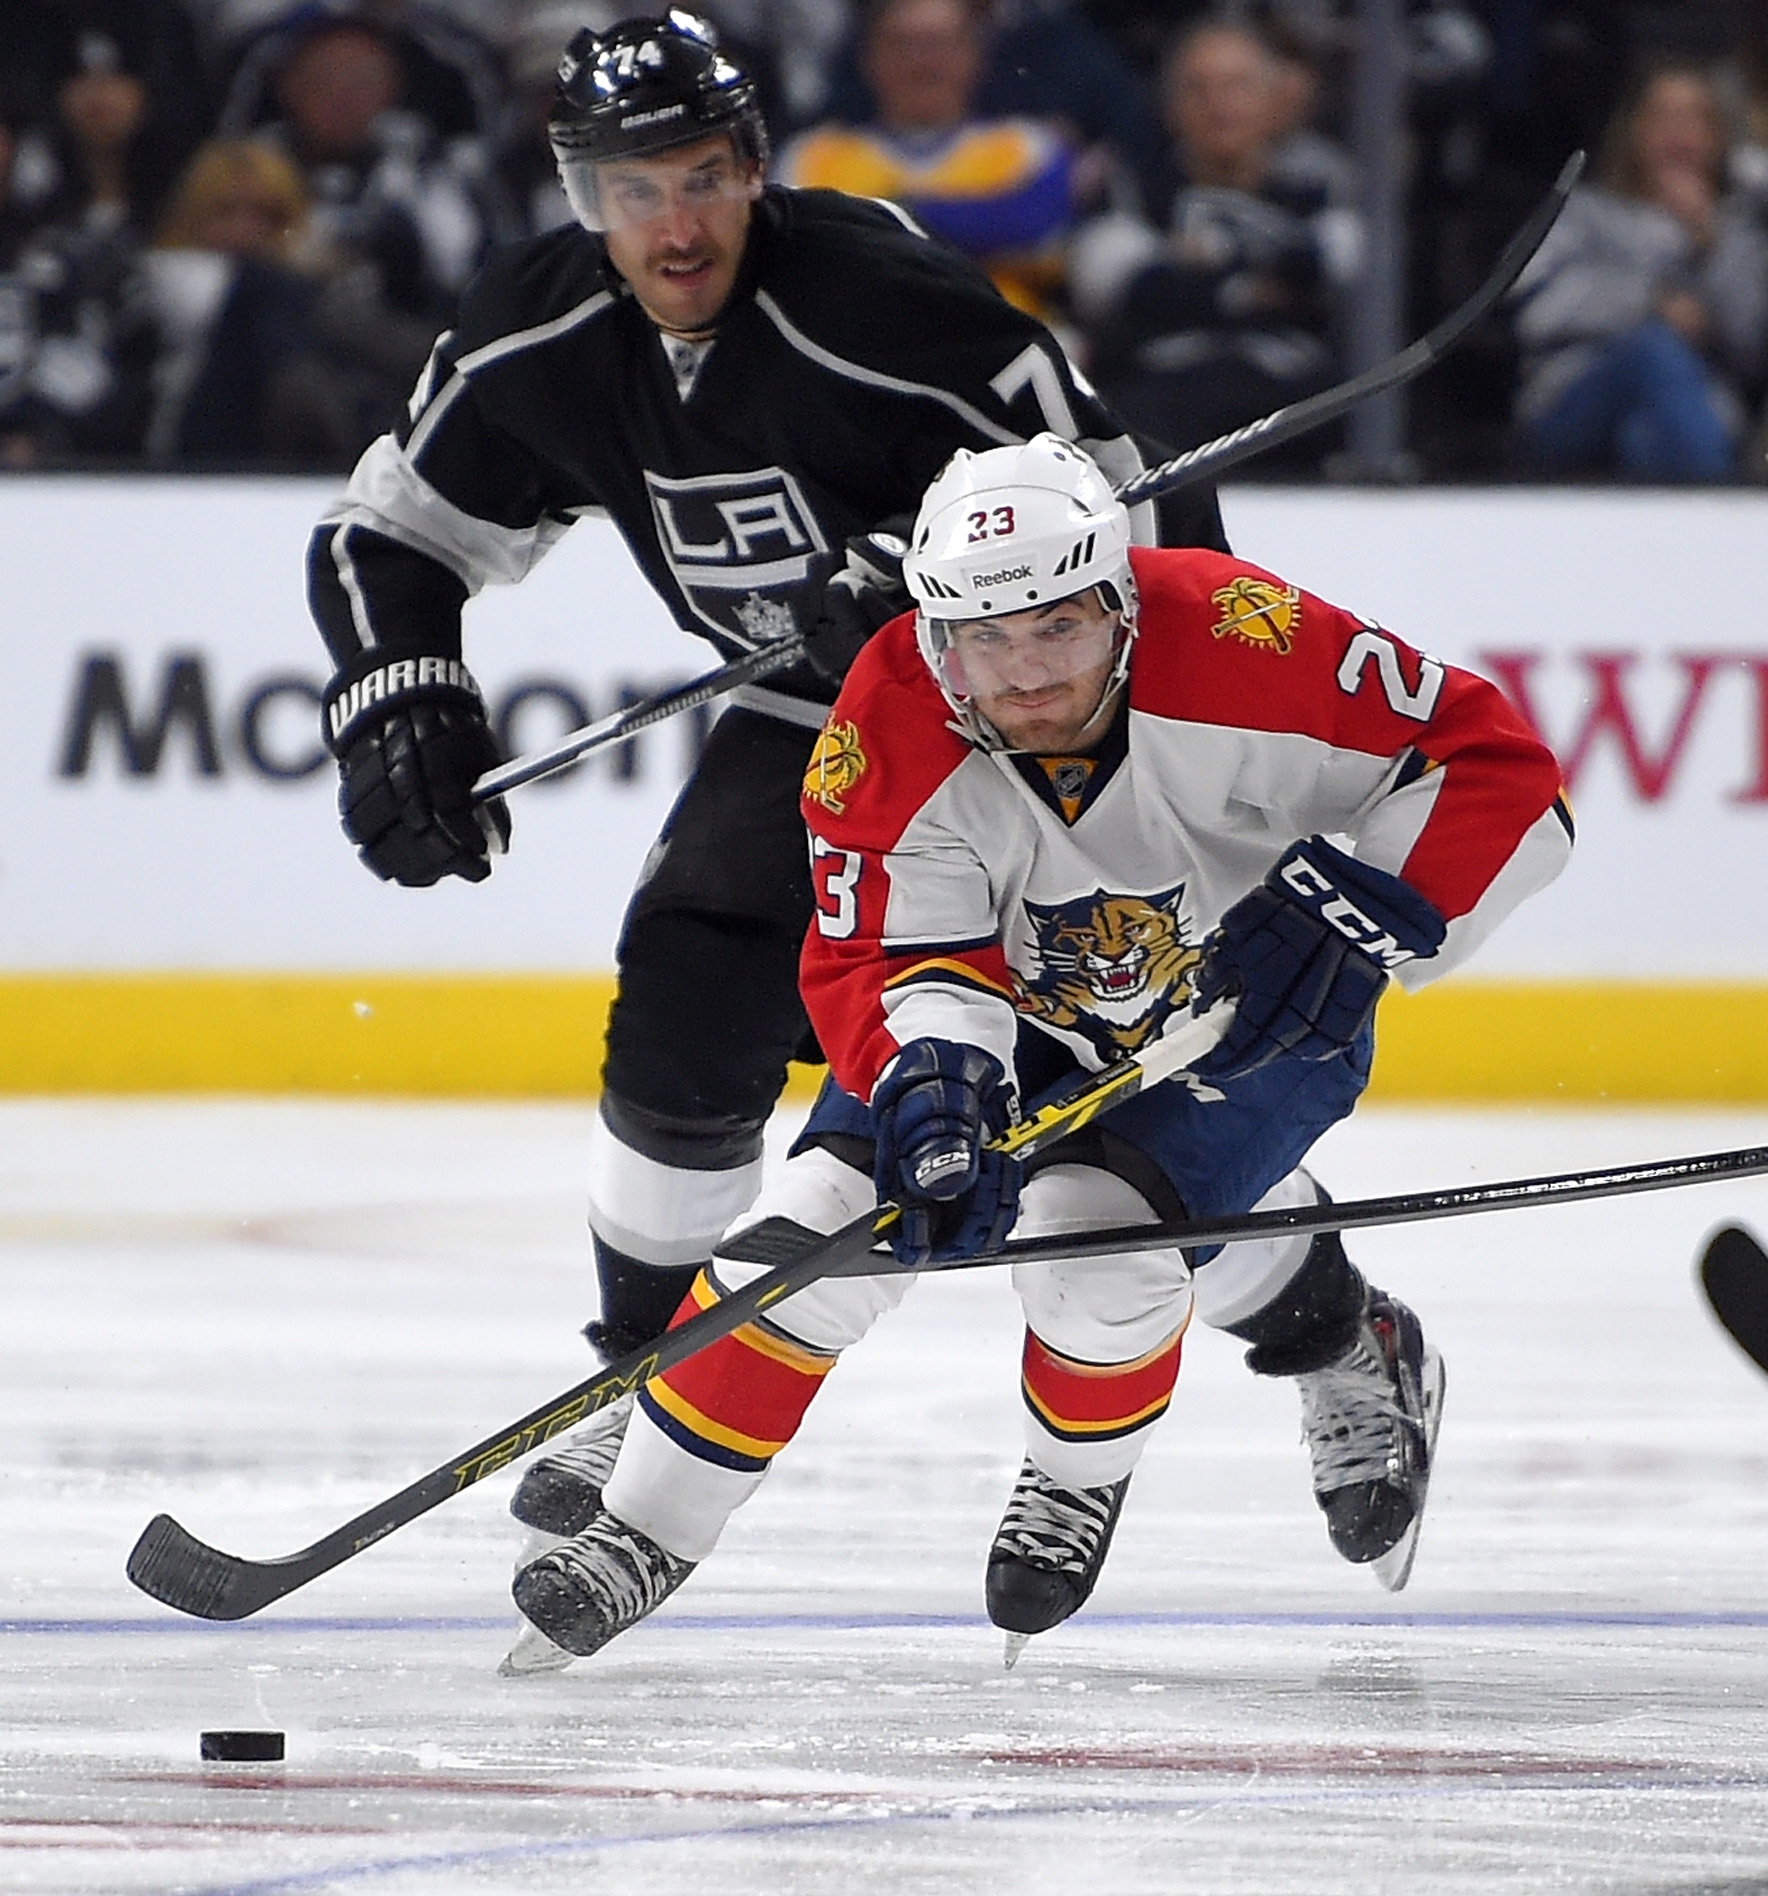 Florida Panthers Rocco Grimaldi, right, moves the puck as Los Angeles Kings left wing Dwight King gives chase during the third period of an NHL hockey game, Tuesday, Nov. 18, 2014, in Los Angeles. The Kings won 5-2. (AP Photo/Mark J. Terrill)